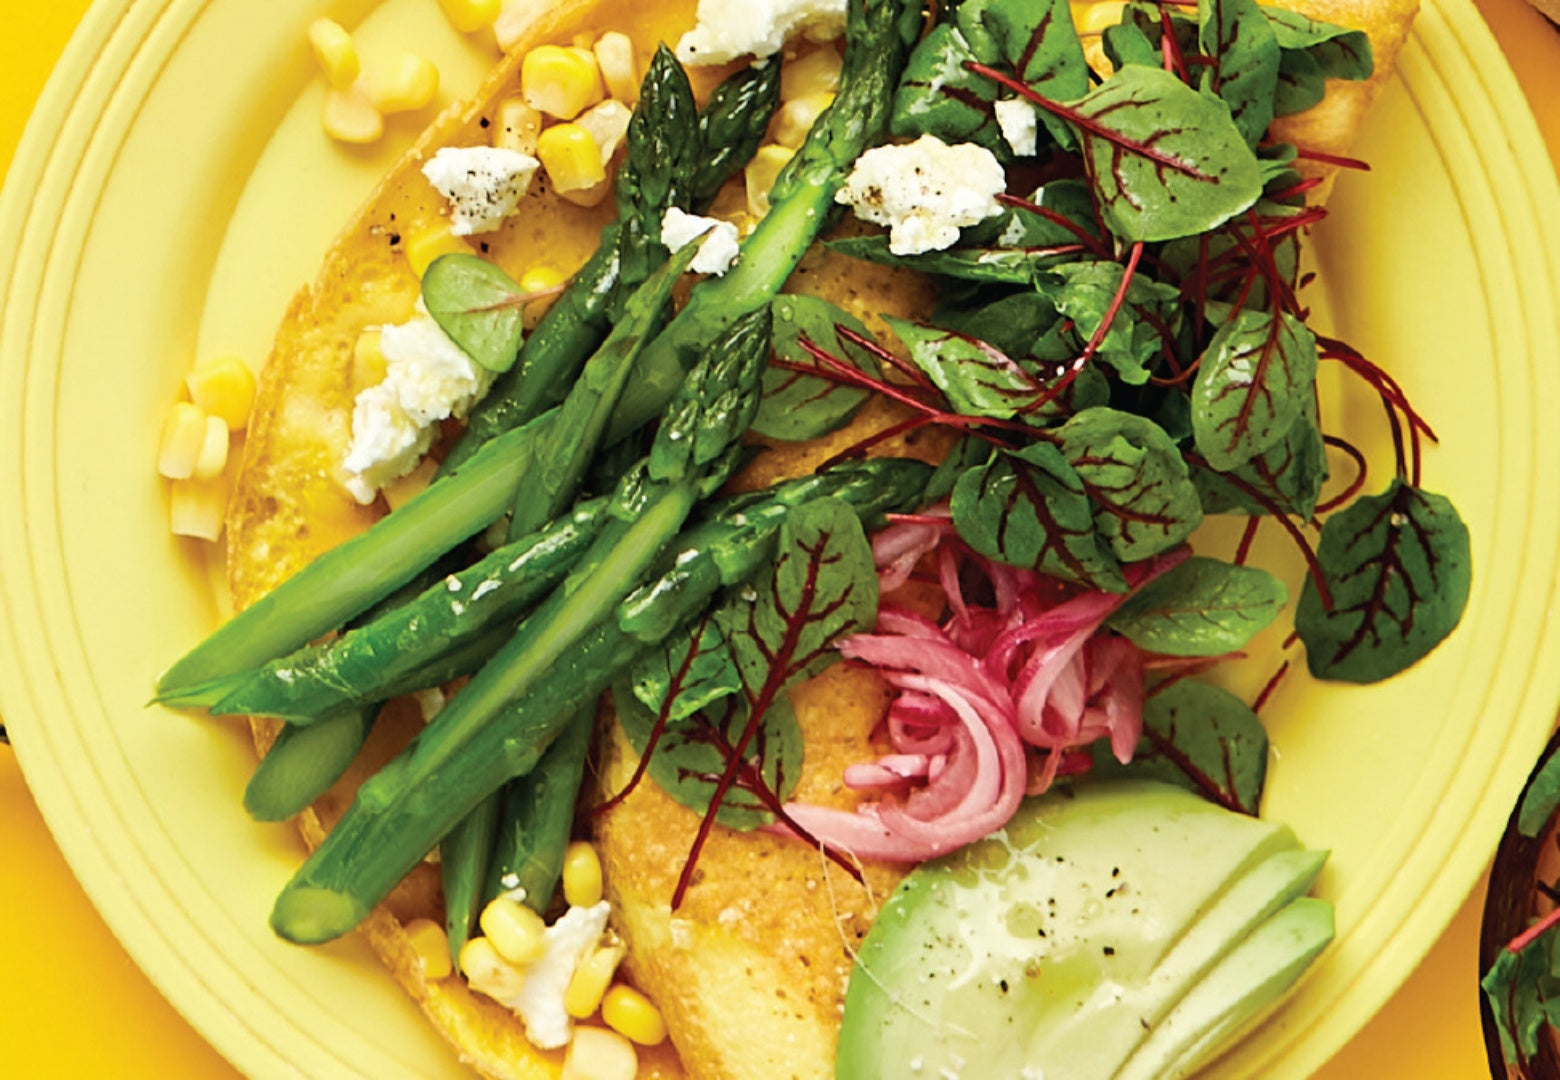 A corn omelette with feta, asparagus, avocado and red onion